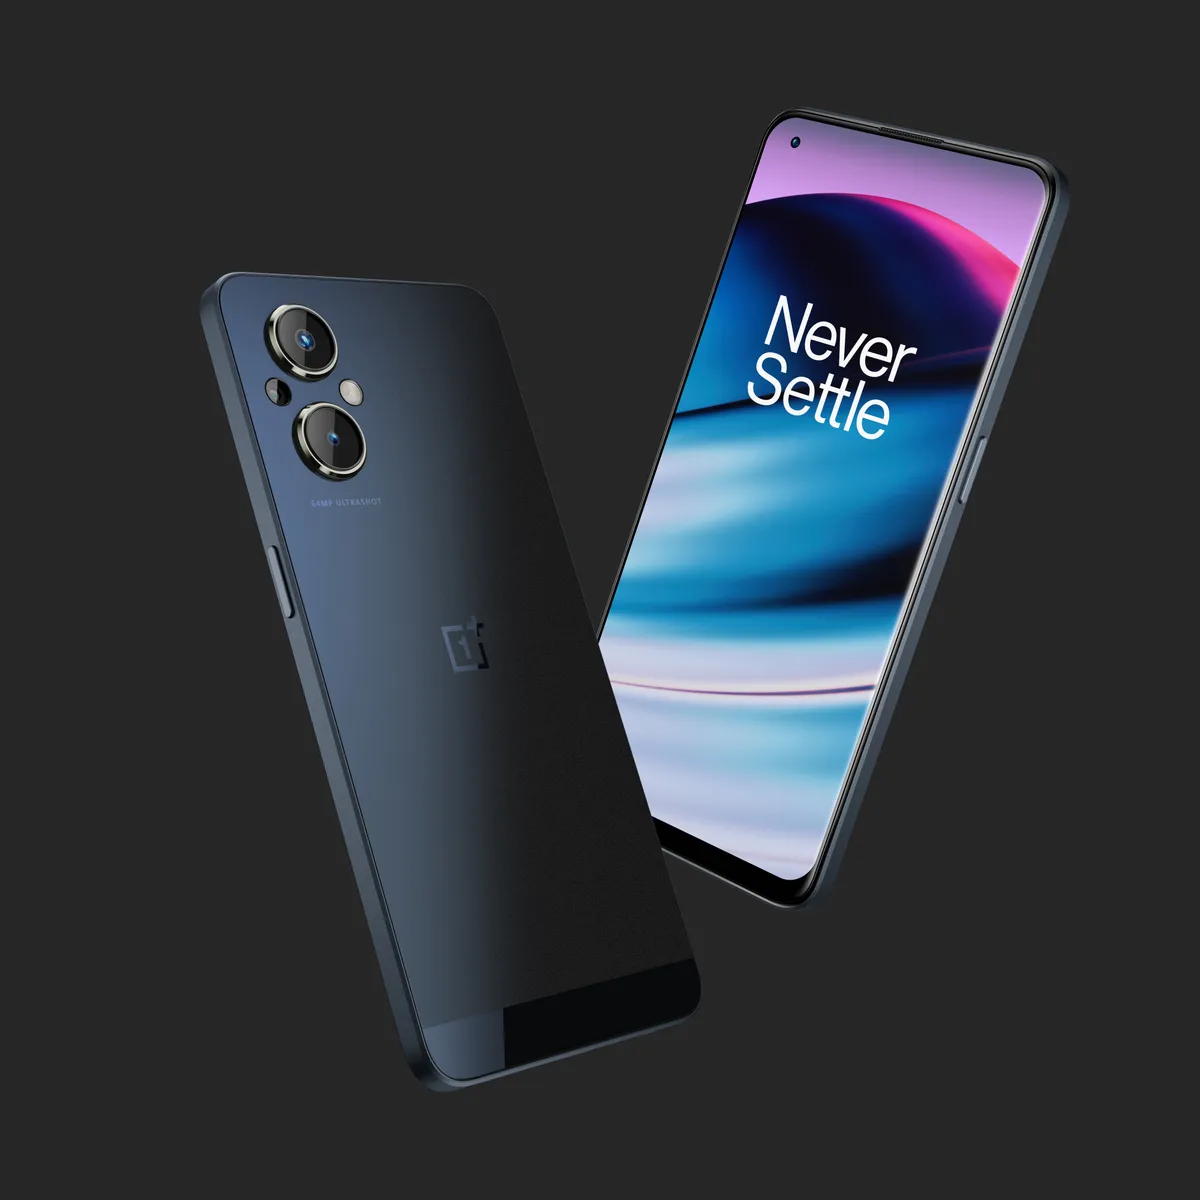 How Much PTA Tax for OnePlus 7 and OnePlus 8 Models in Pakistan?